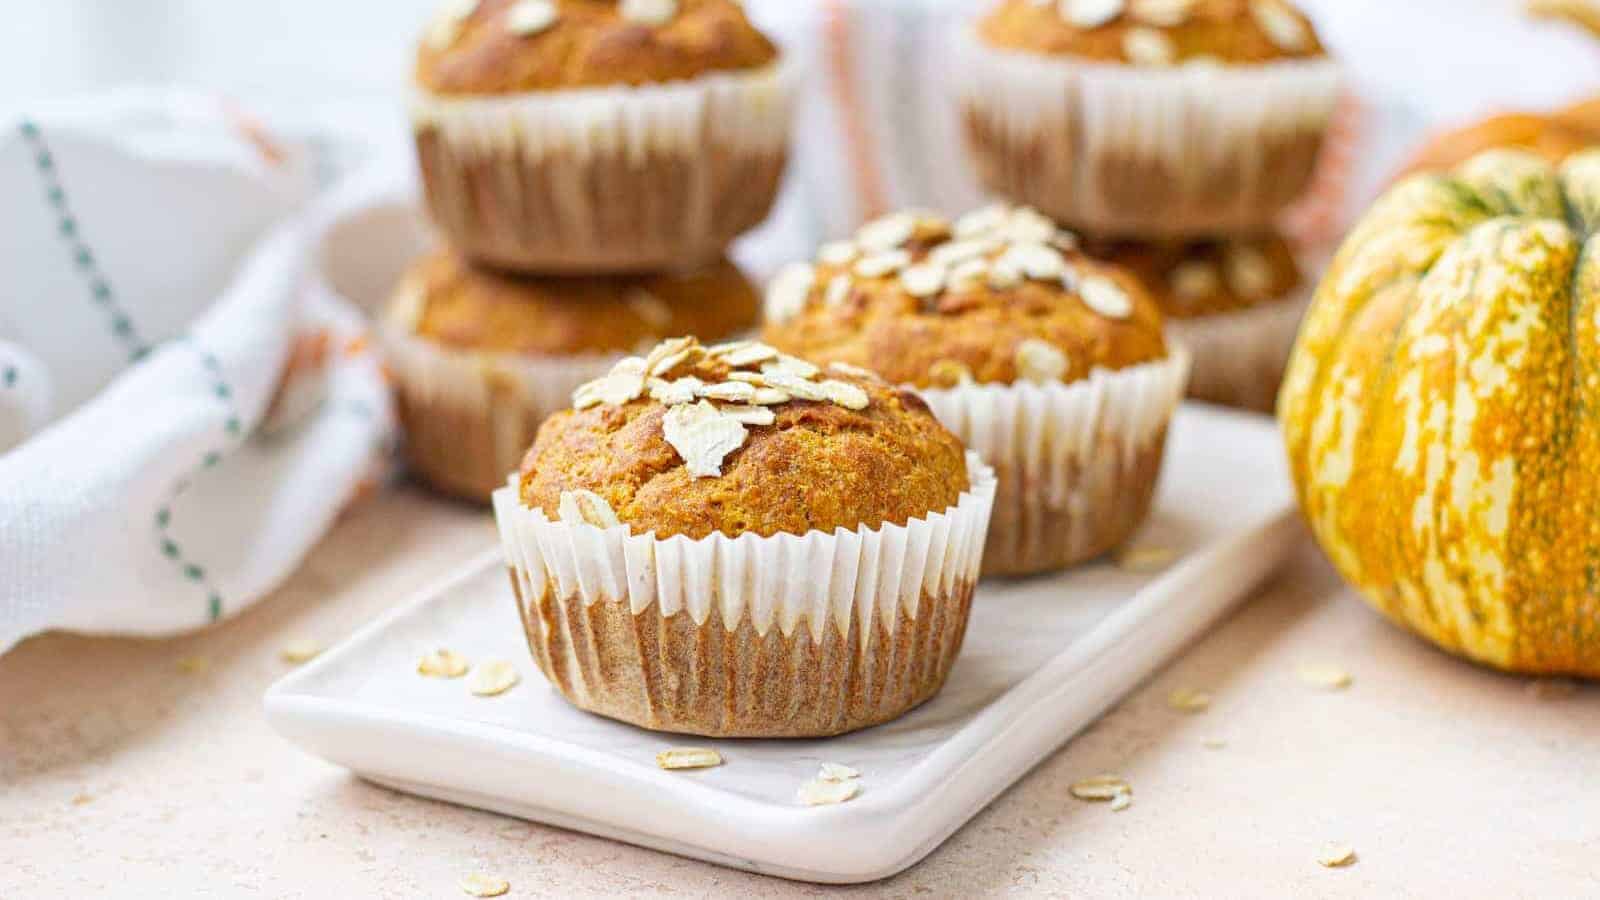 Pumpkin banana oat muffins on a white plate with pumpkins in the background.